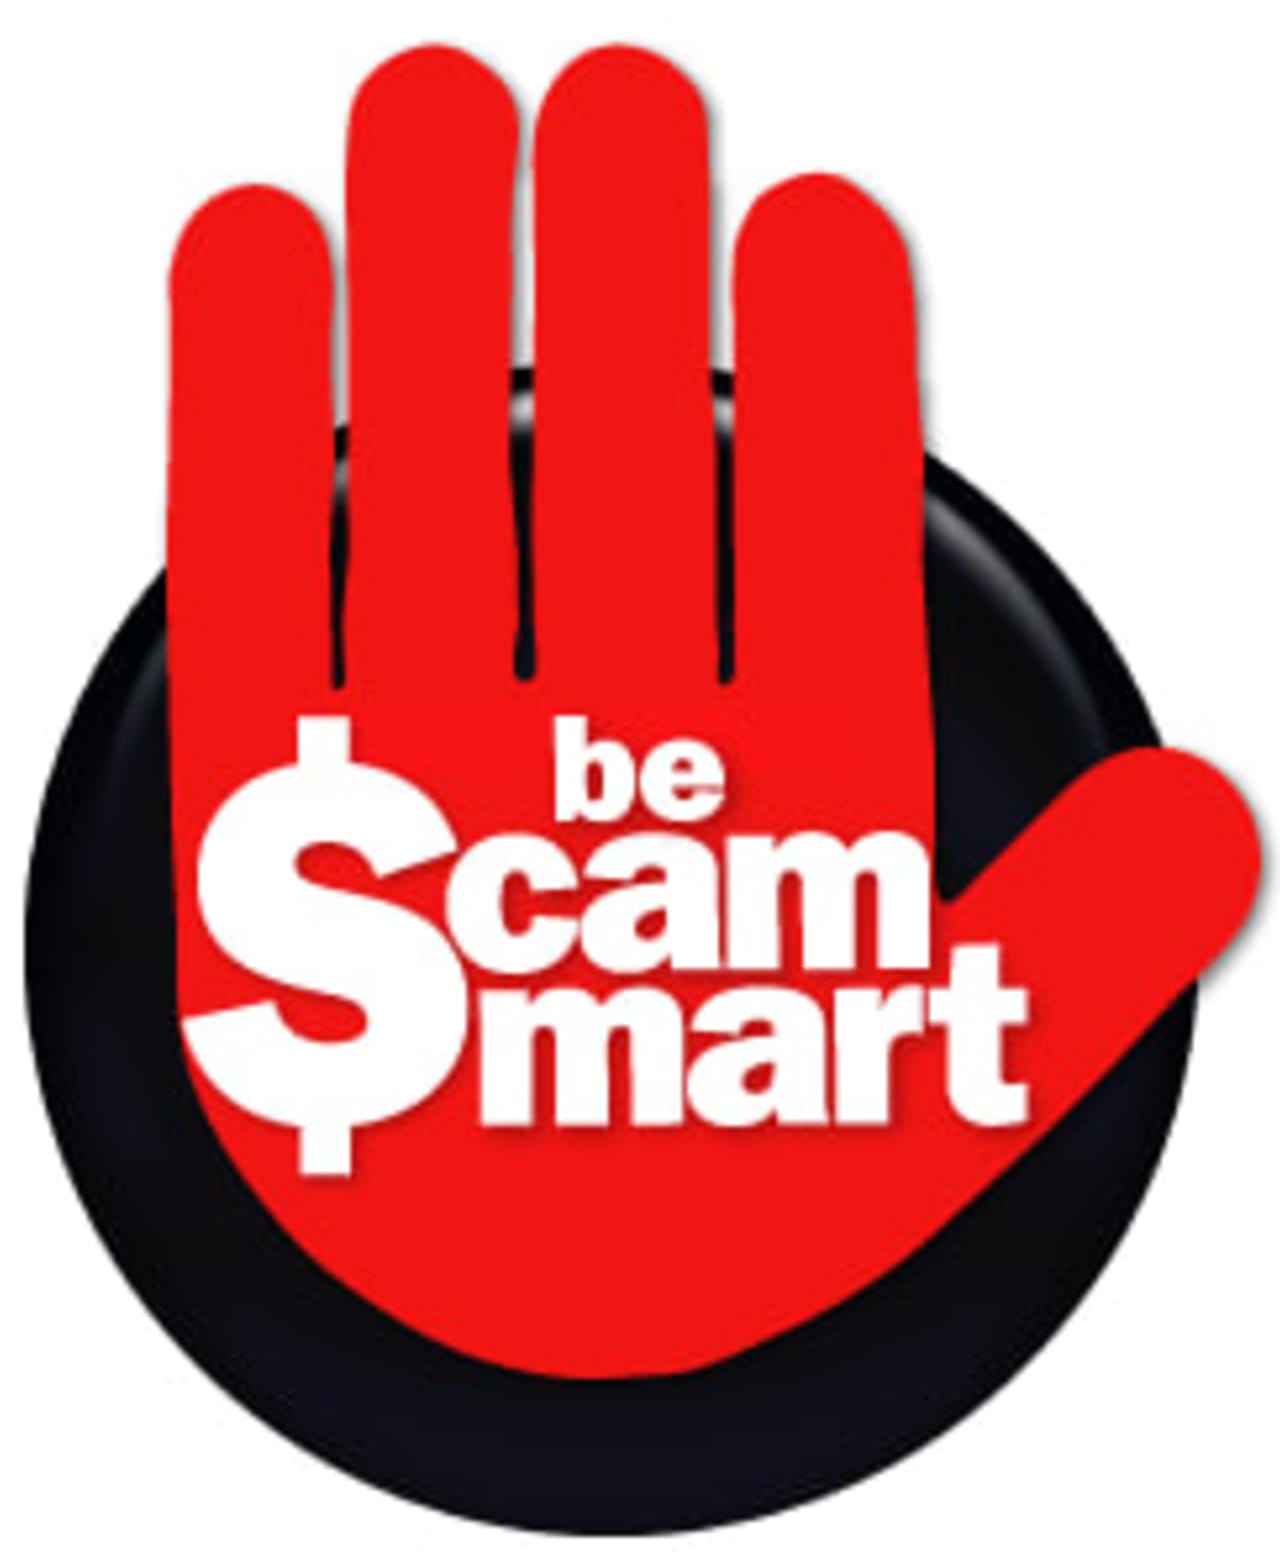 If residents are concerned about a possible scam, they should contact the Fairfield police at 203-254-4800 and file a report. 